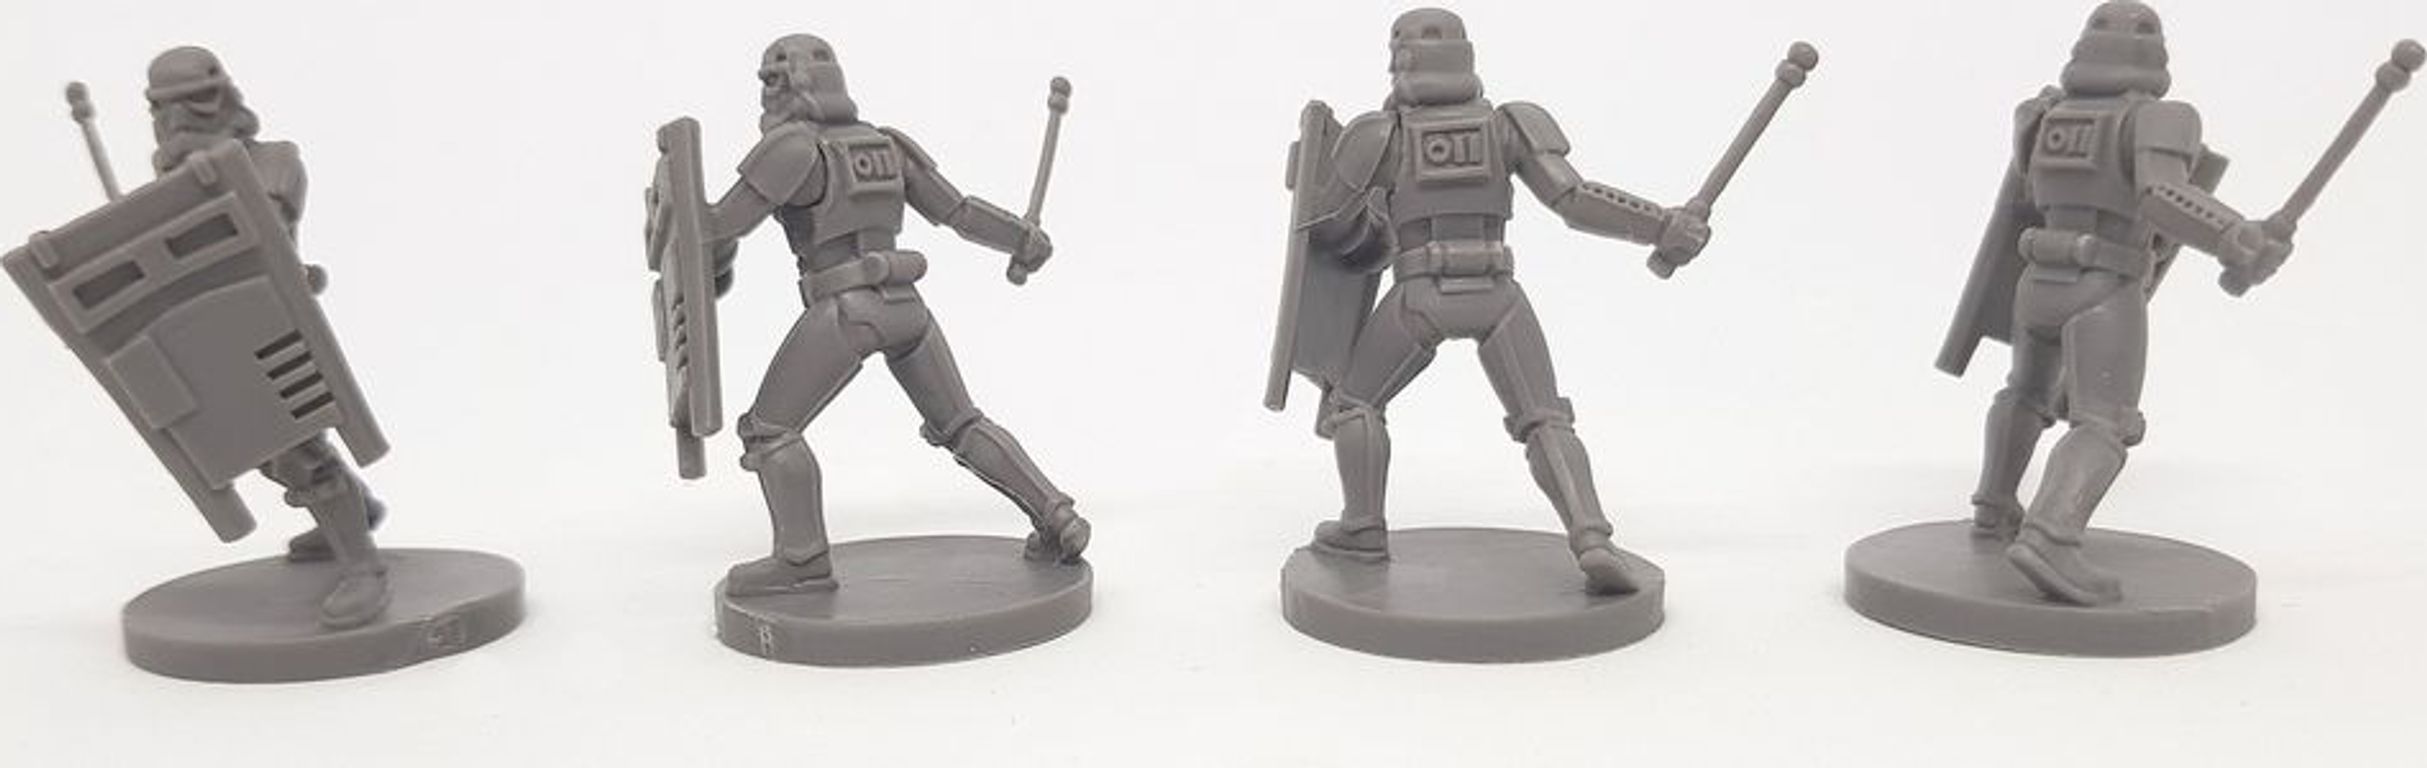 Star Wars: Imperial Assault - Heart of the Empire miniatures